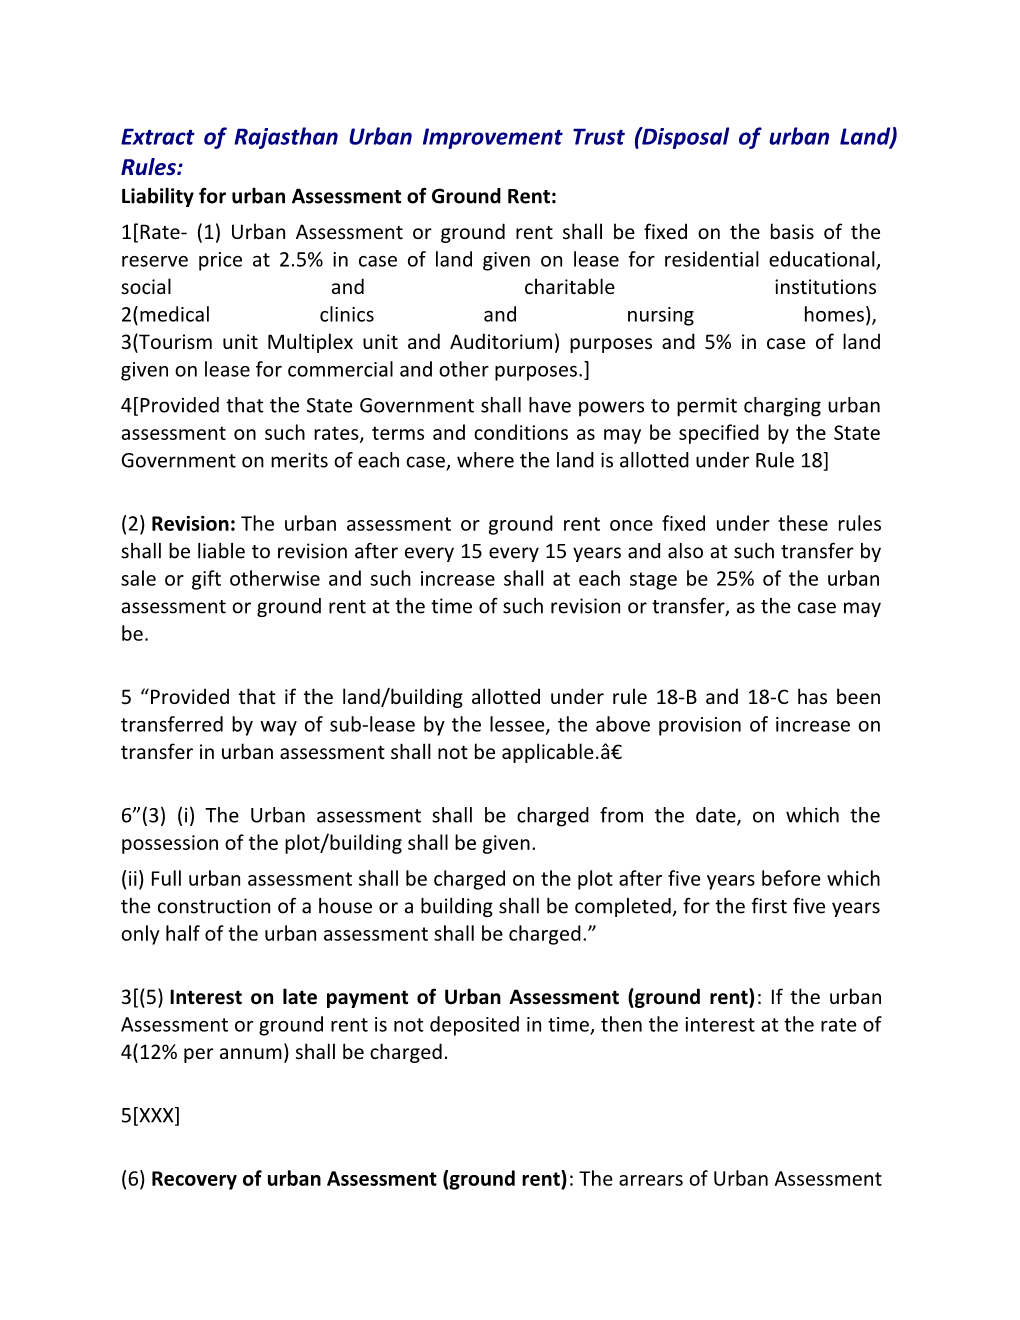 Extract of Rajasthan Urban Improvement Trust (Disposal of Urban Land) Rules